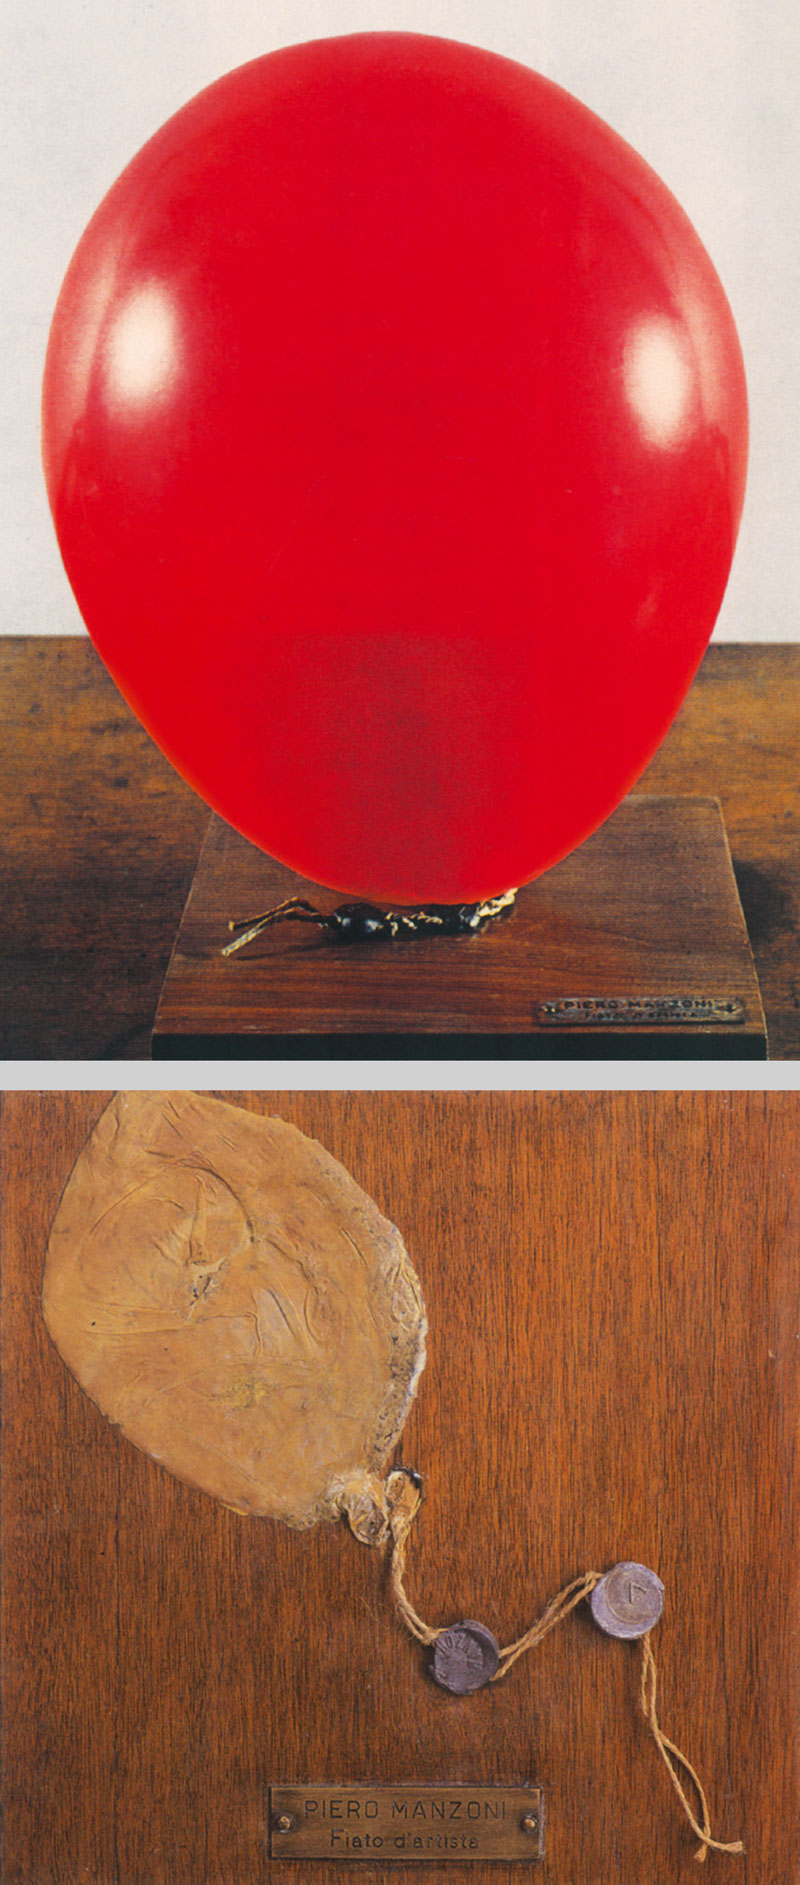 Two photographs of Piero Manzoni’s nineteen sixty conceptual work “Fiato d’artista.” The first is “happy”, showing an inflated balloon, and the second is “sad,” showing a deflated balloon.